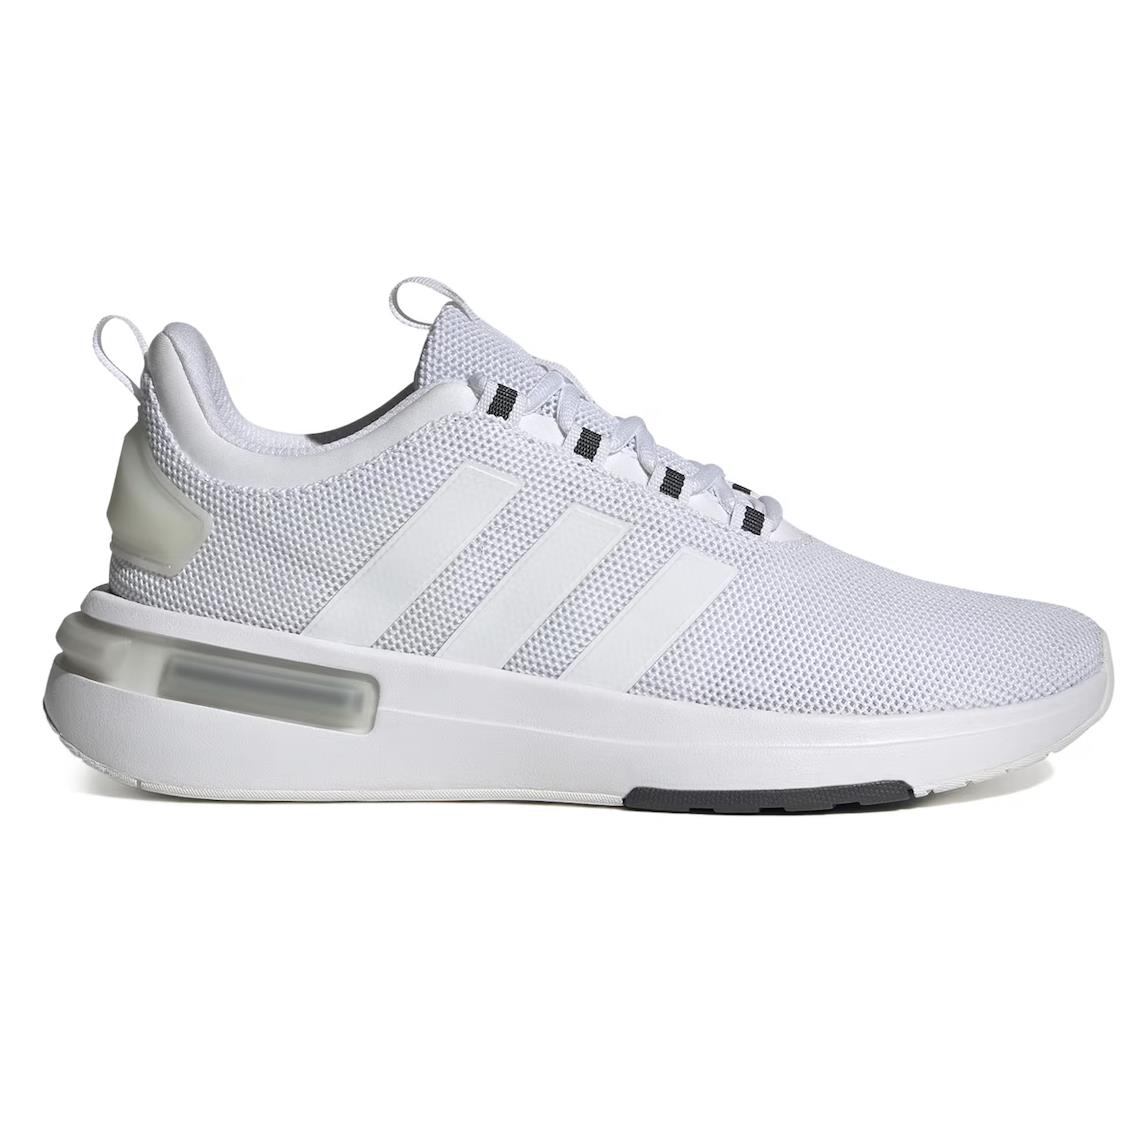 Adidas Casual Shoes Classic Mens TR23 Athletic Sneaker Multi Color All Sizes White/Gum